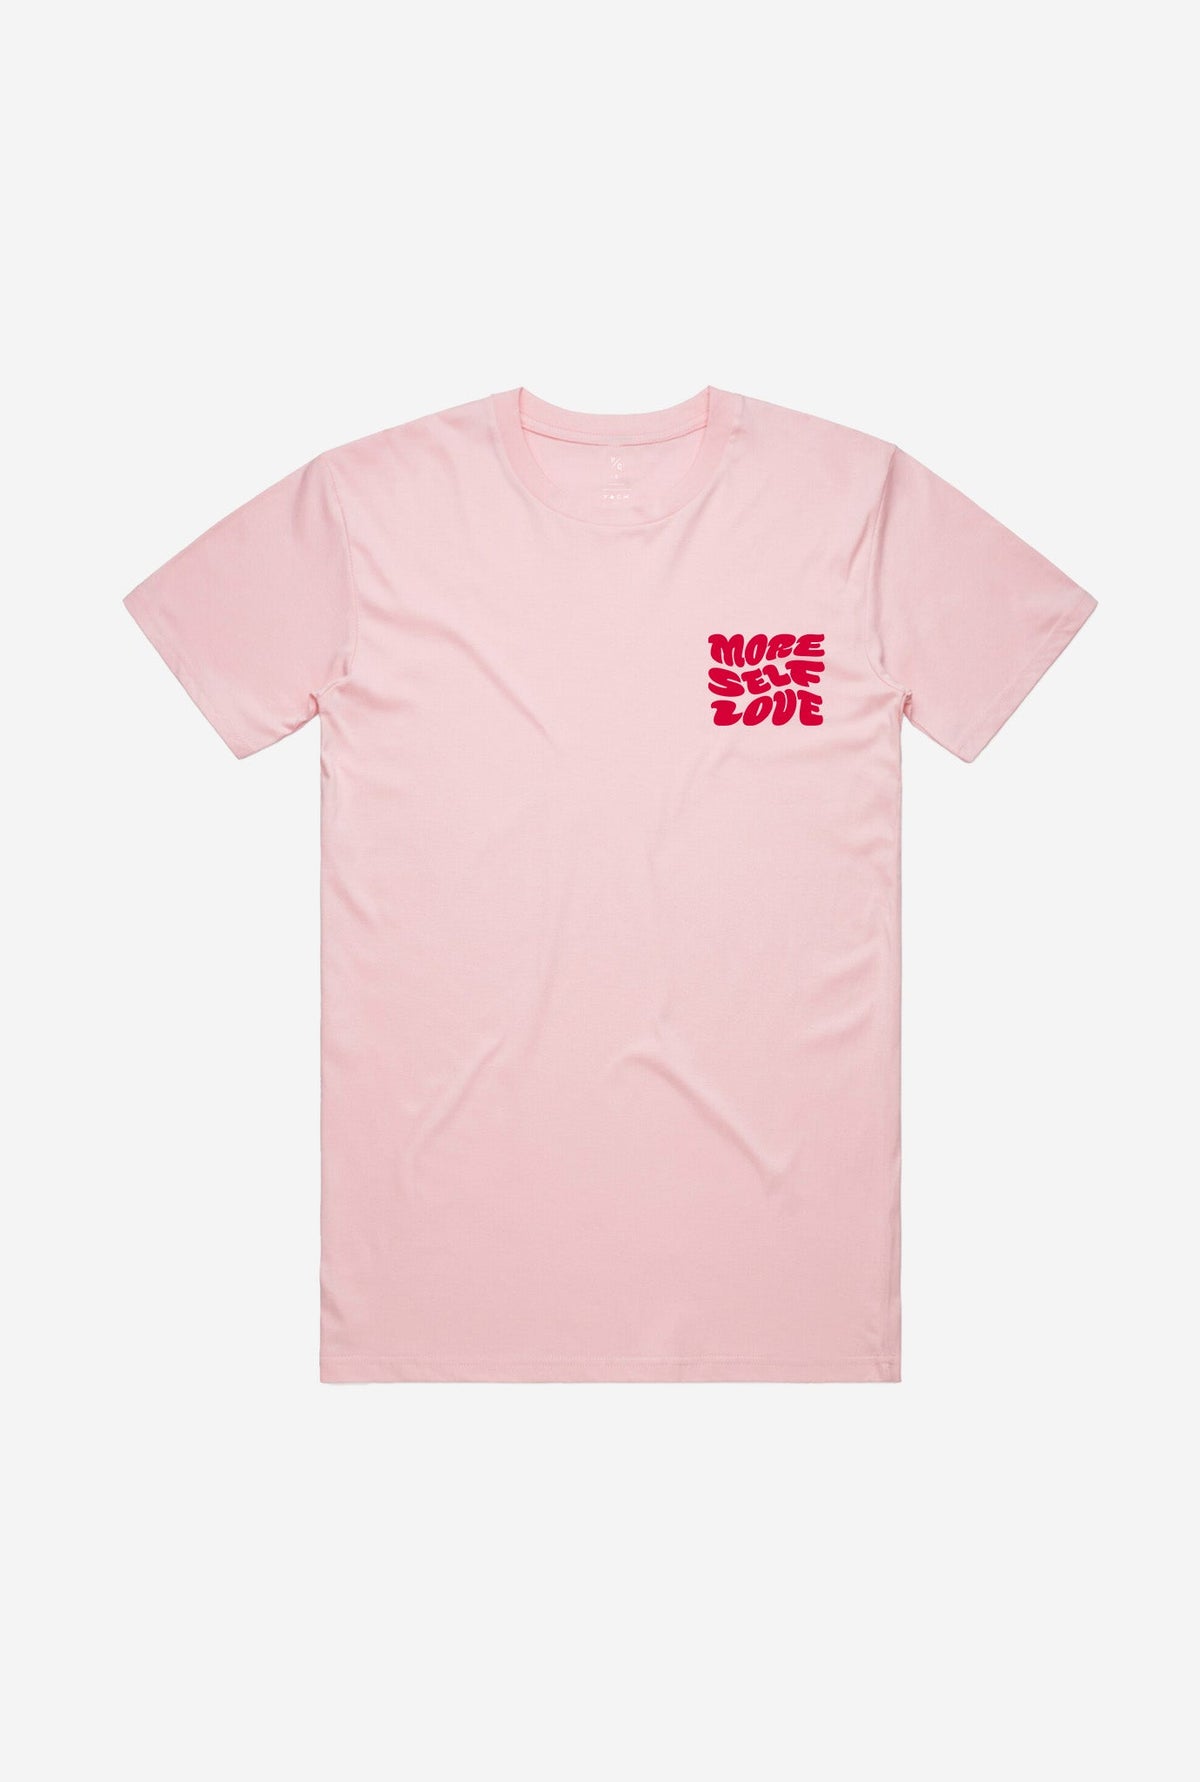 More Self Love Valentines Day T-Shirt - Pink